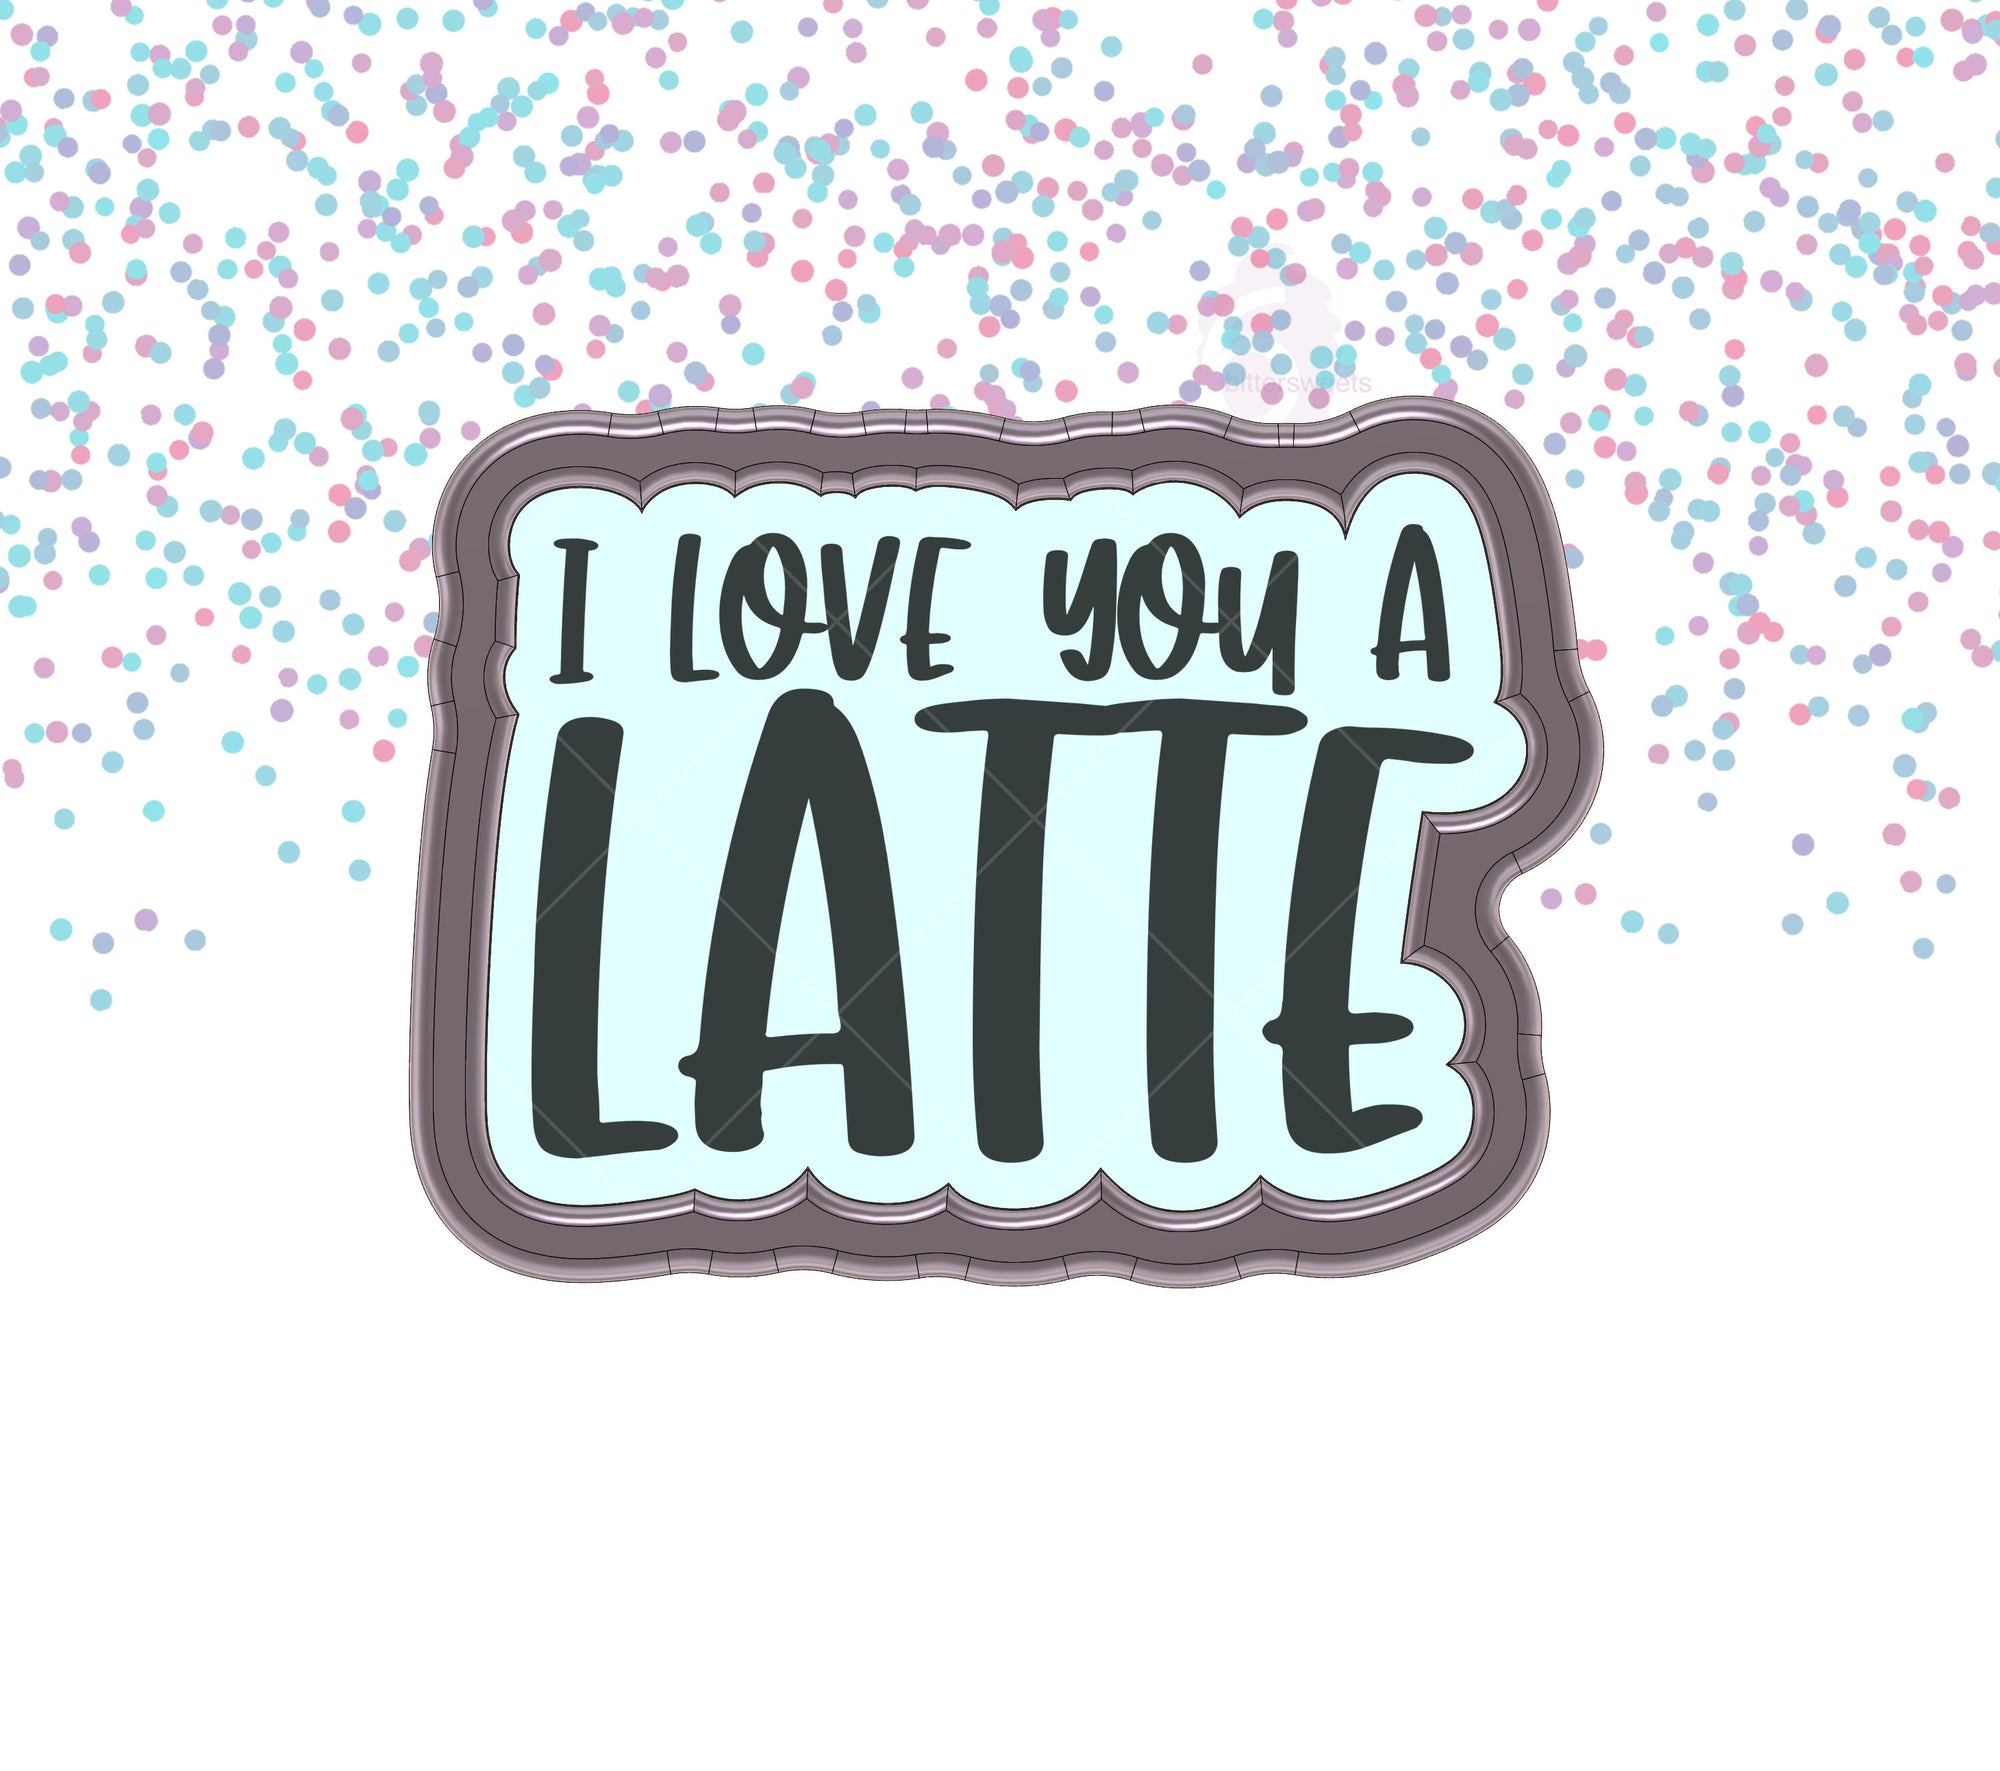 I Love You A Latte Lettered Cookie Cutter